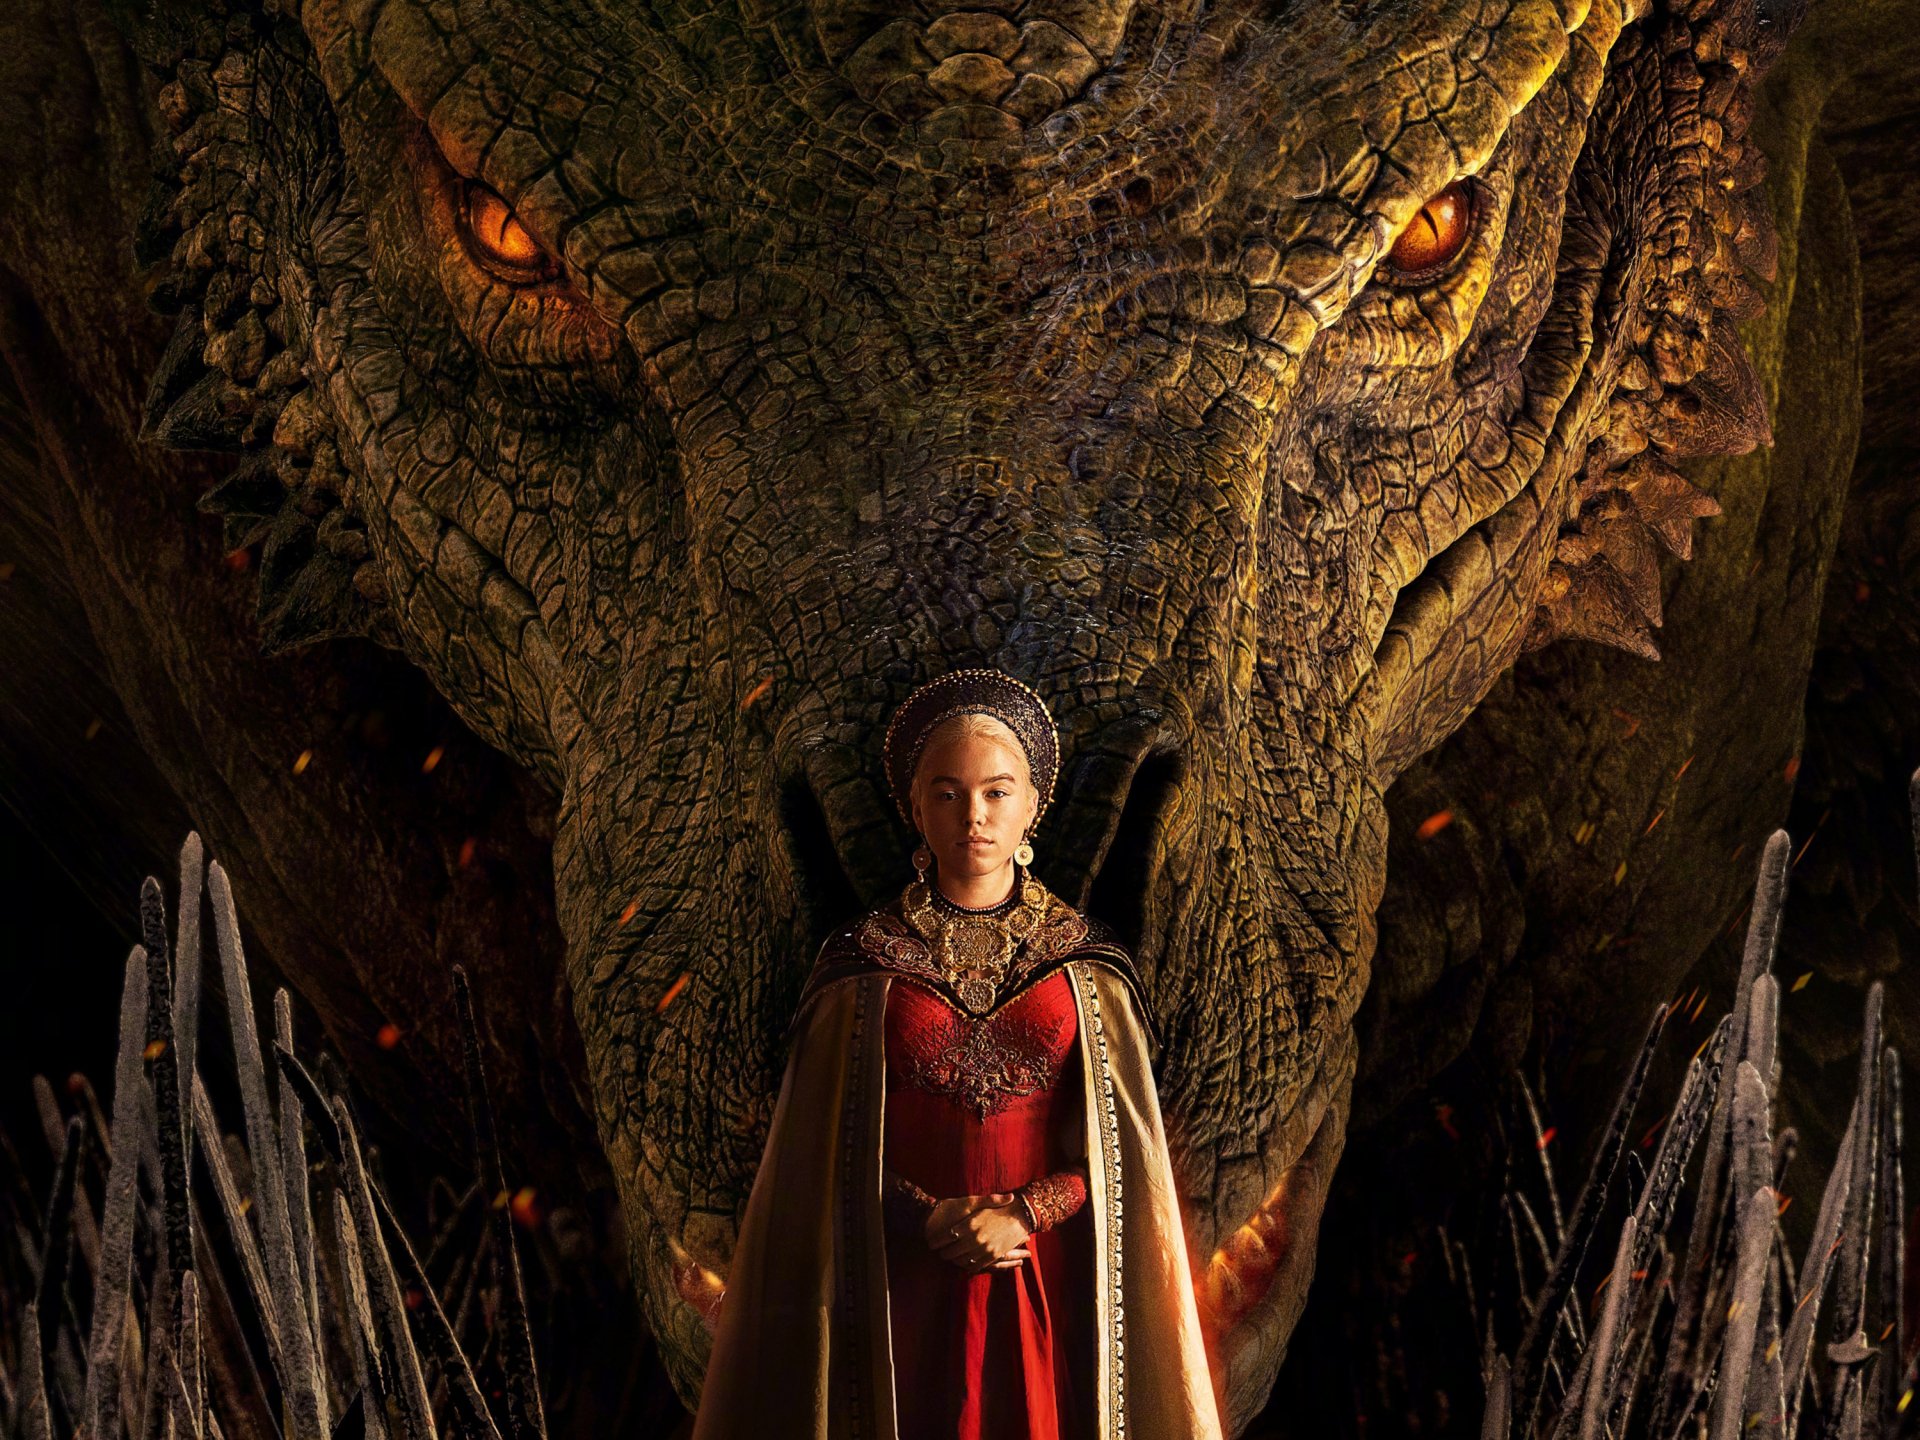 Rhaenyra Targaryen portrayed by Milly Alcock in the TV show House of the Dragon - HD desktop wallpaper and background.